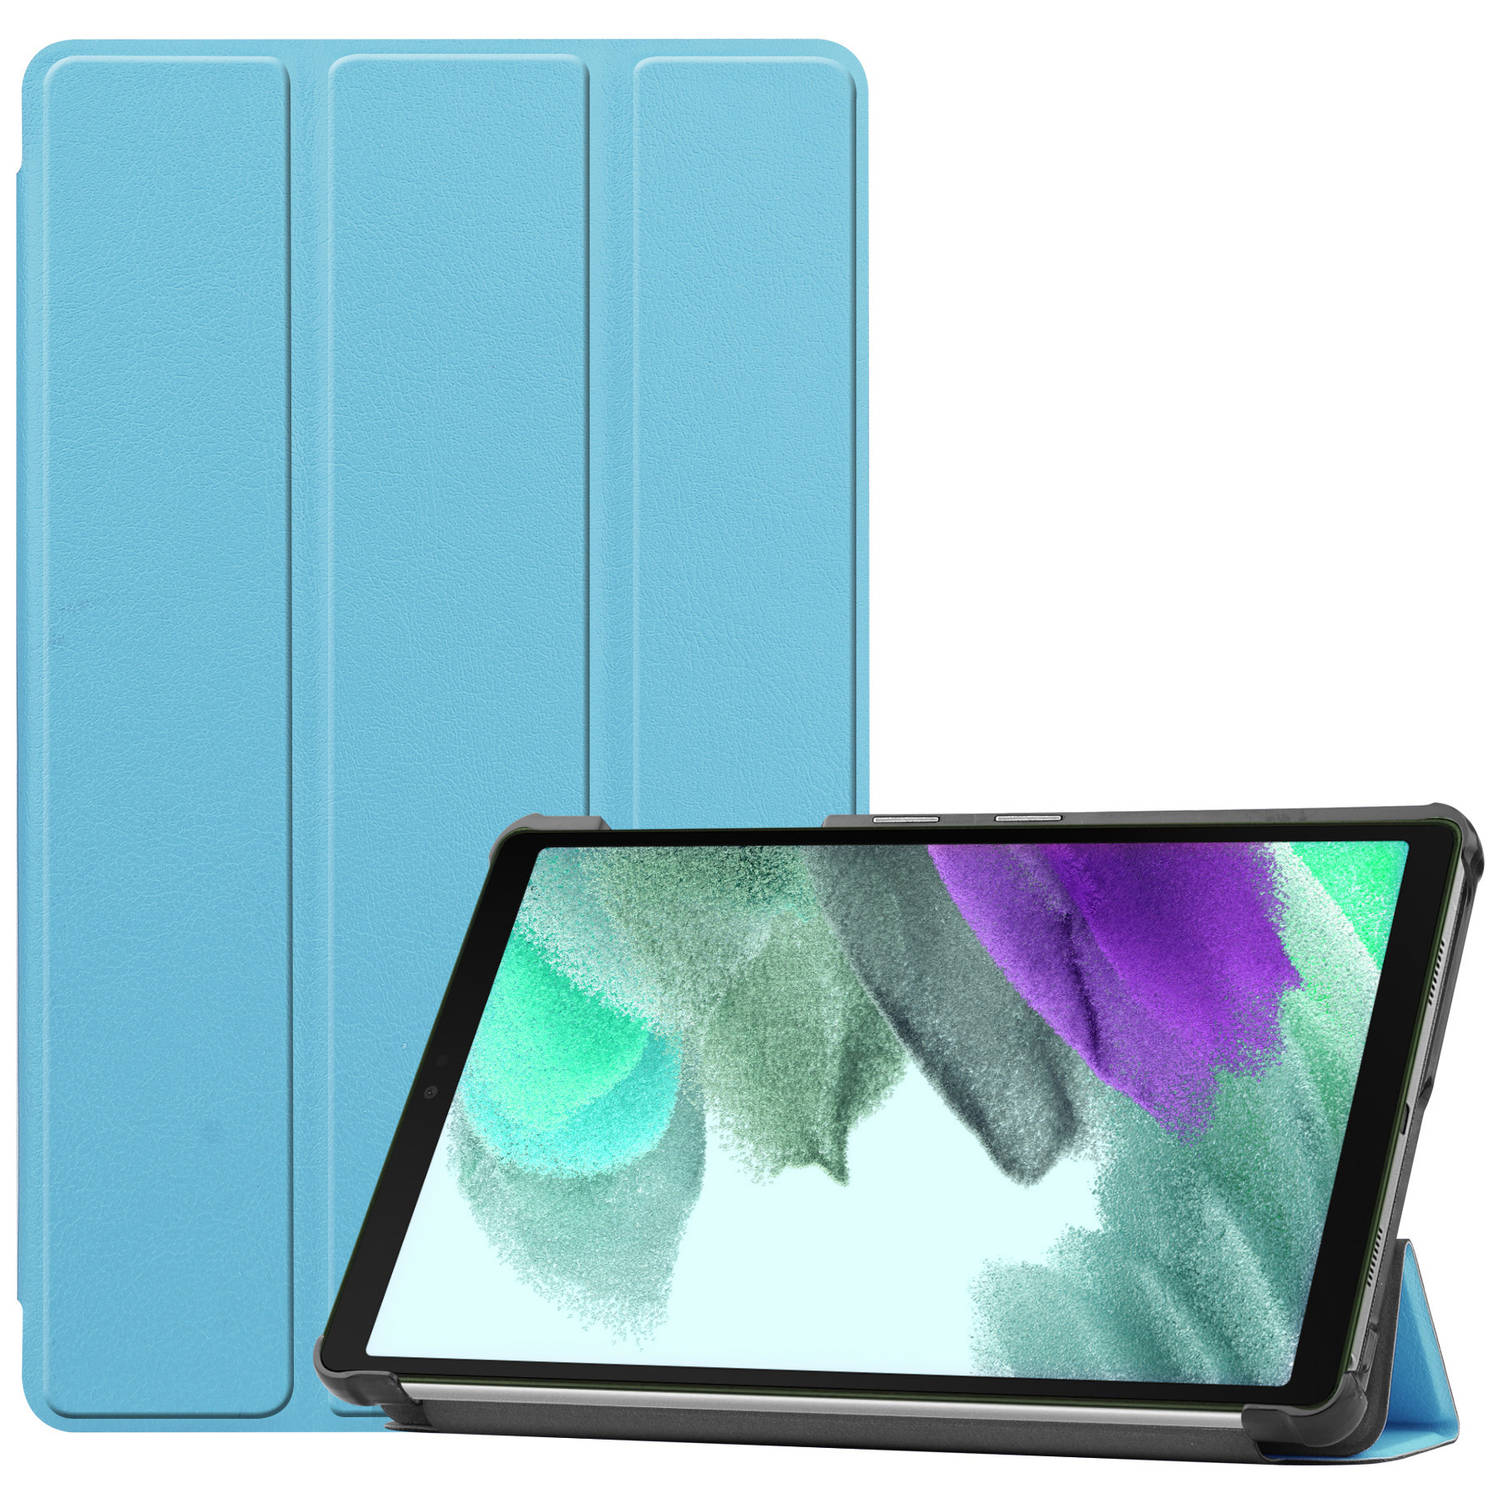 Basey Samsung Galaxy Tab S6 Lite Hoesje Kunstleer Hoes Case Cover Lichtblauw